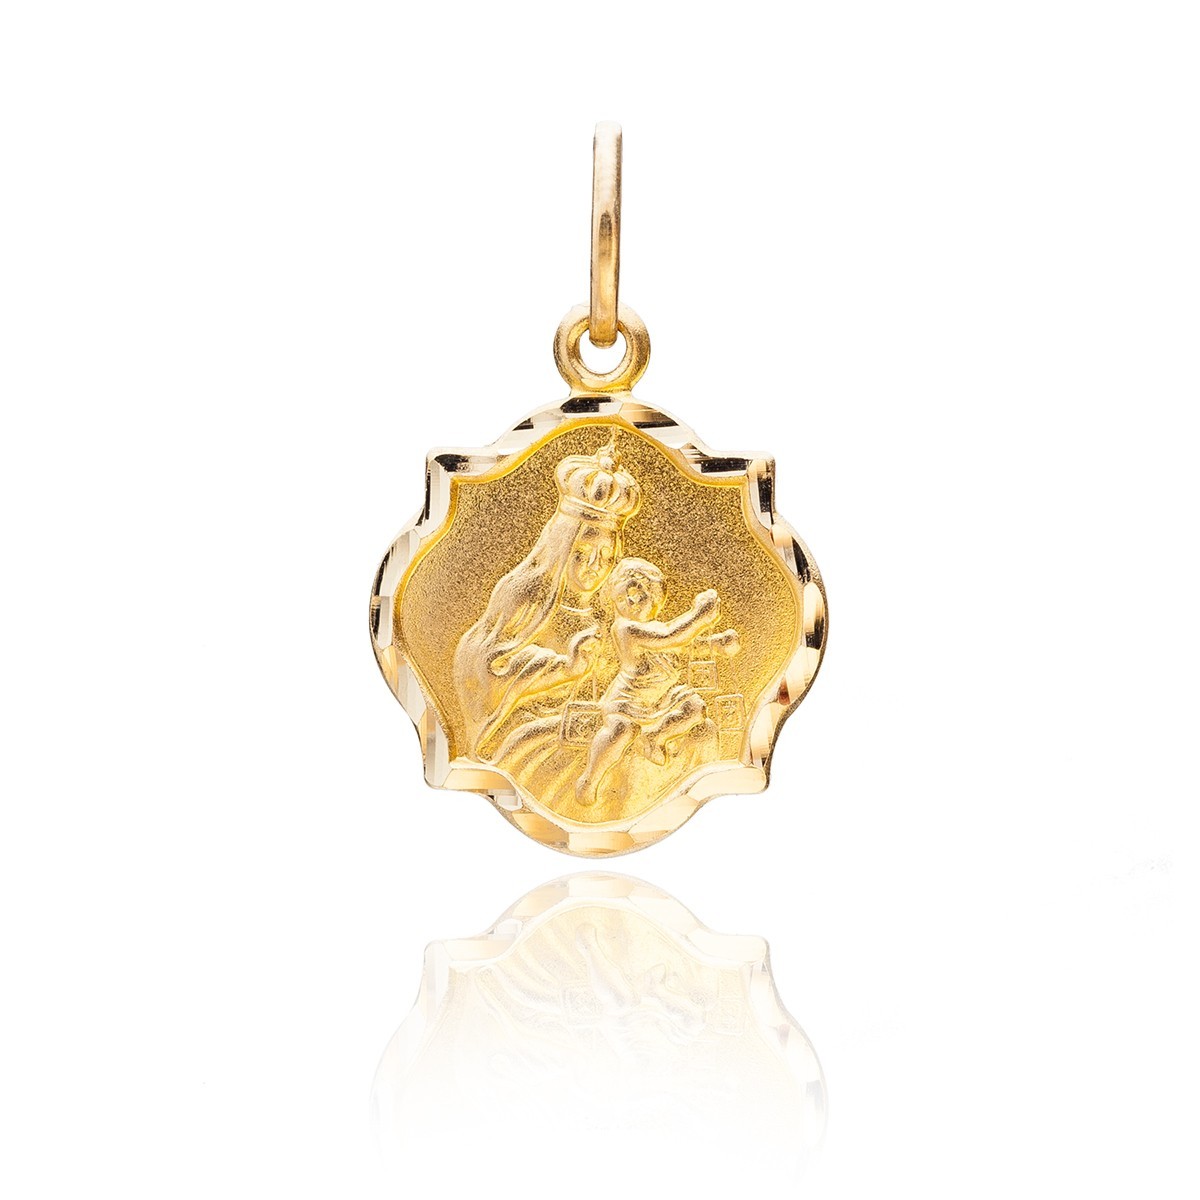 OUR LADY OF MERCY BIG MEDALLION GOLD 14K